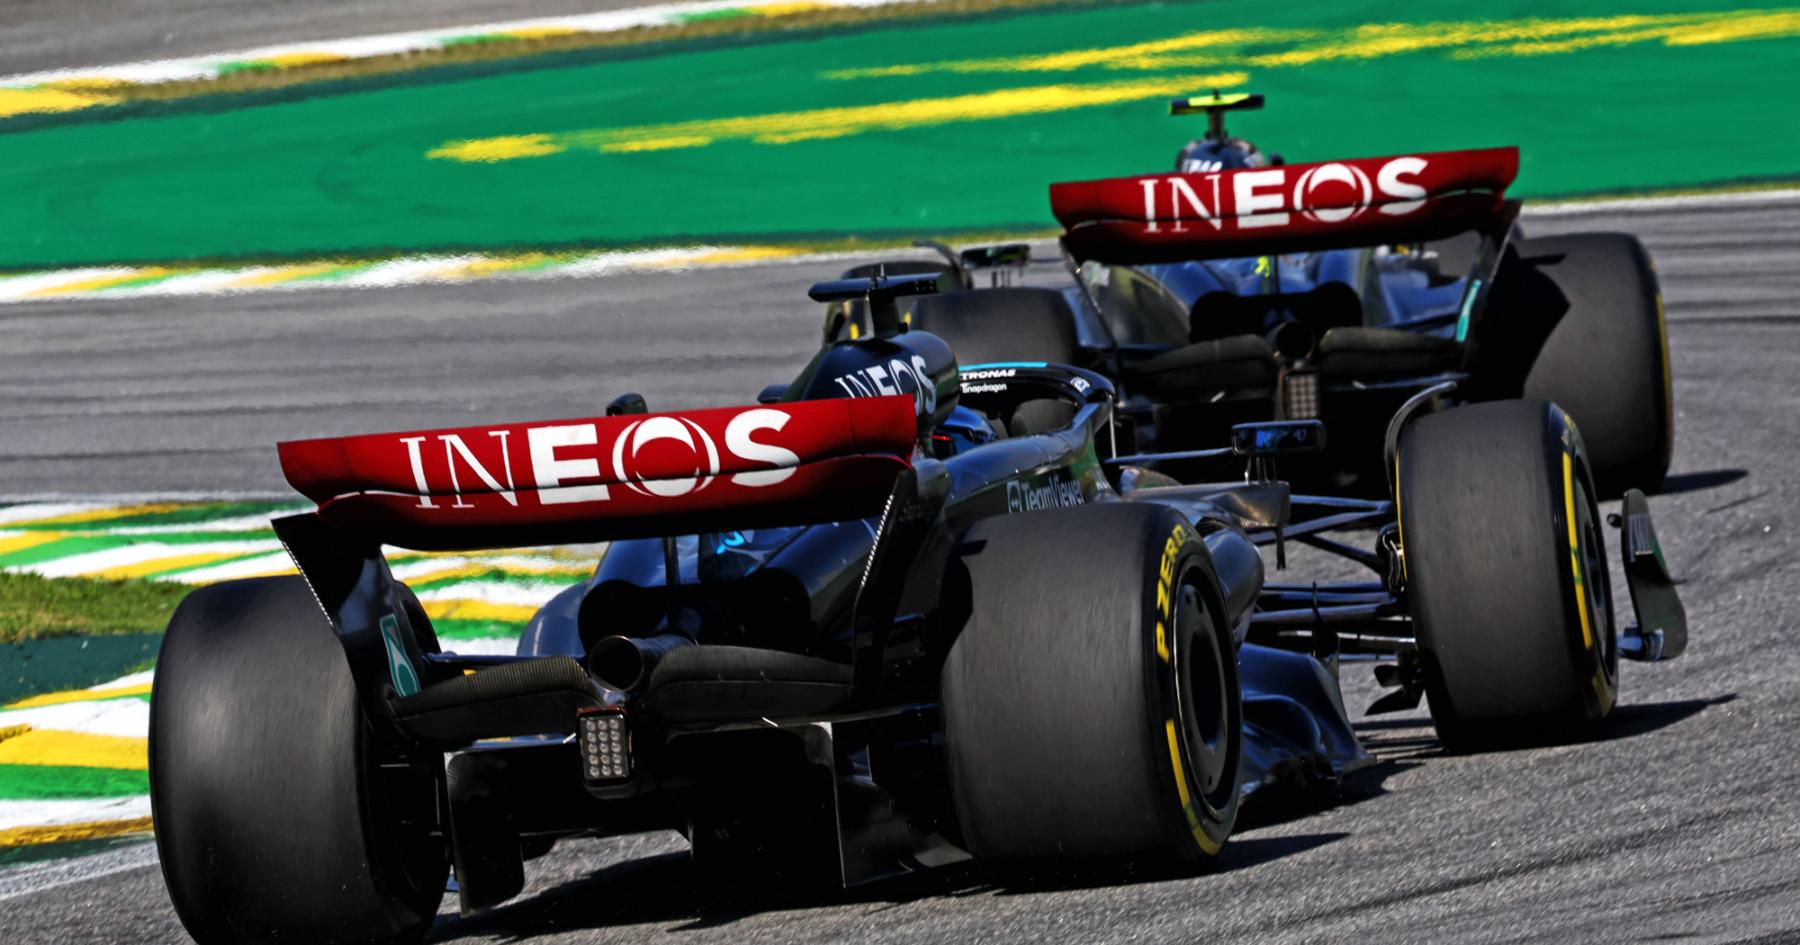 Mercedes slumps to worst F1 start in over a decade